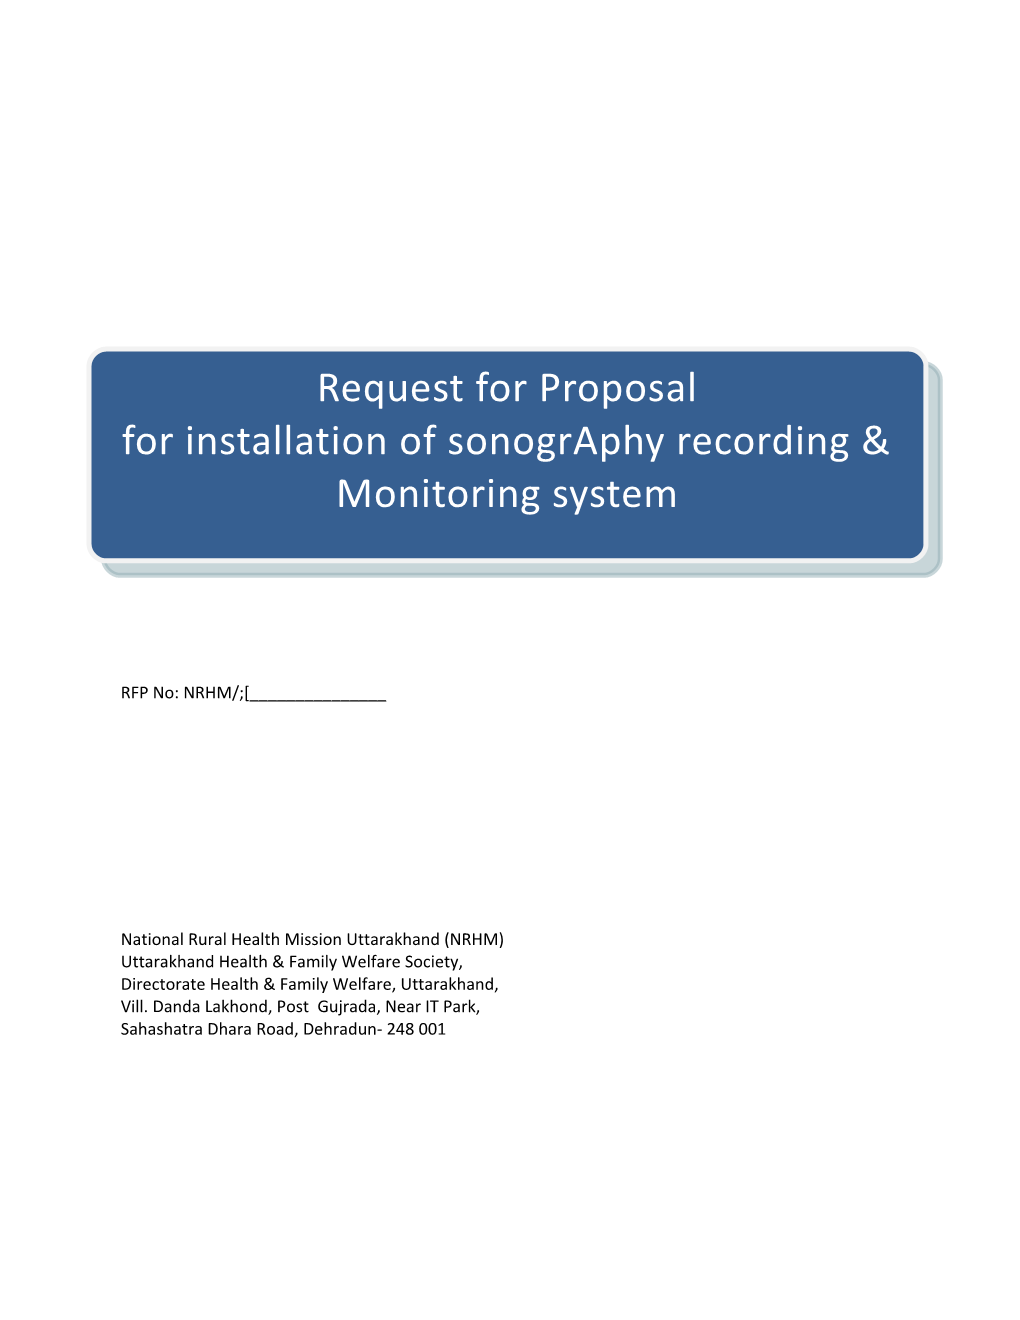 Request for Proposal for Installation of Sonogrpahy Recording & Monitoring System